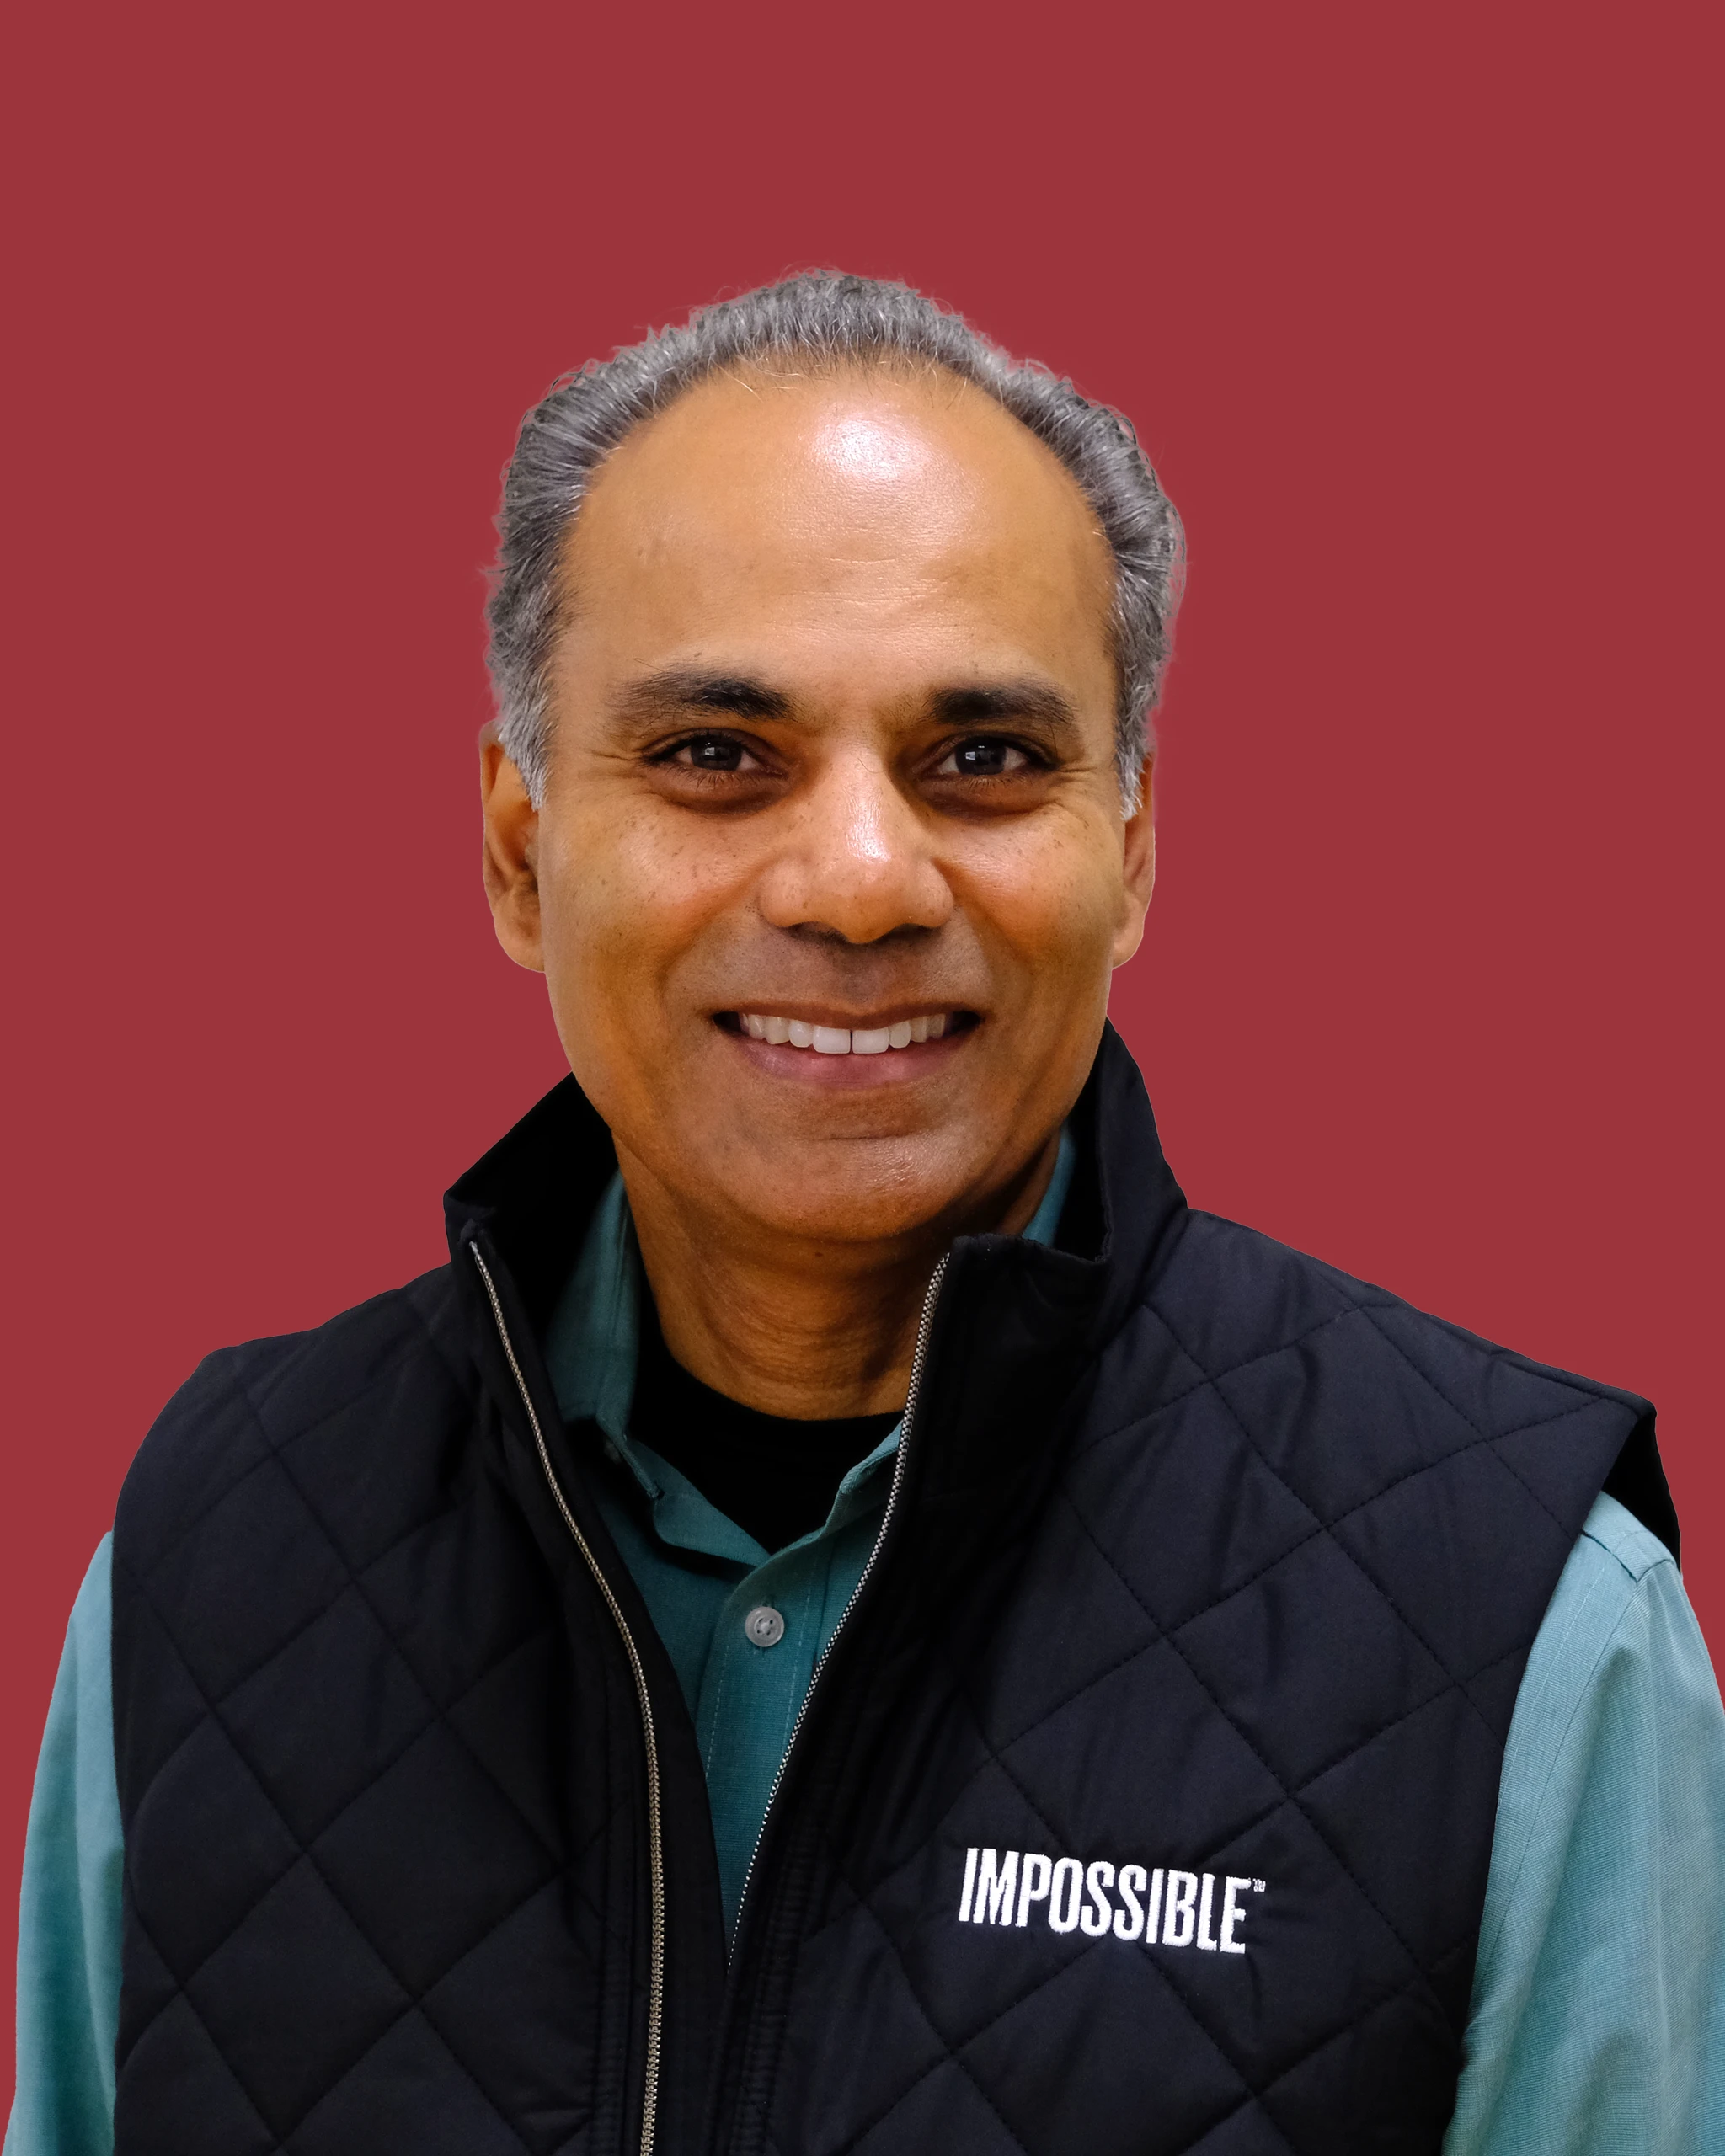 Sunil Chandran is a veteran industrial biotechnology leader and the Chief Science Officer at Impossible Foods.